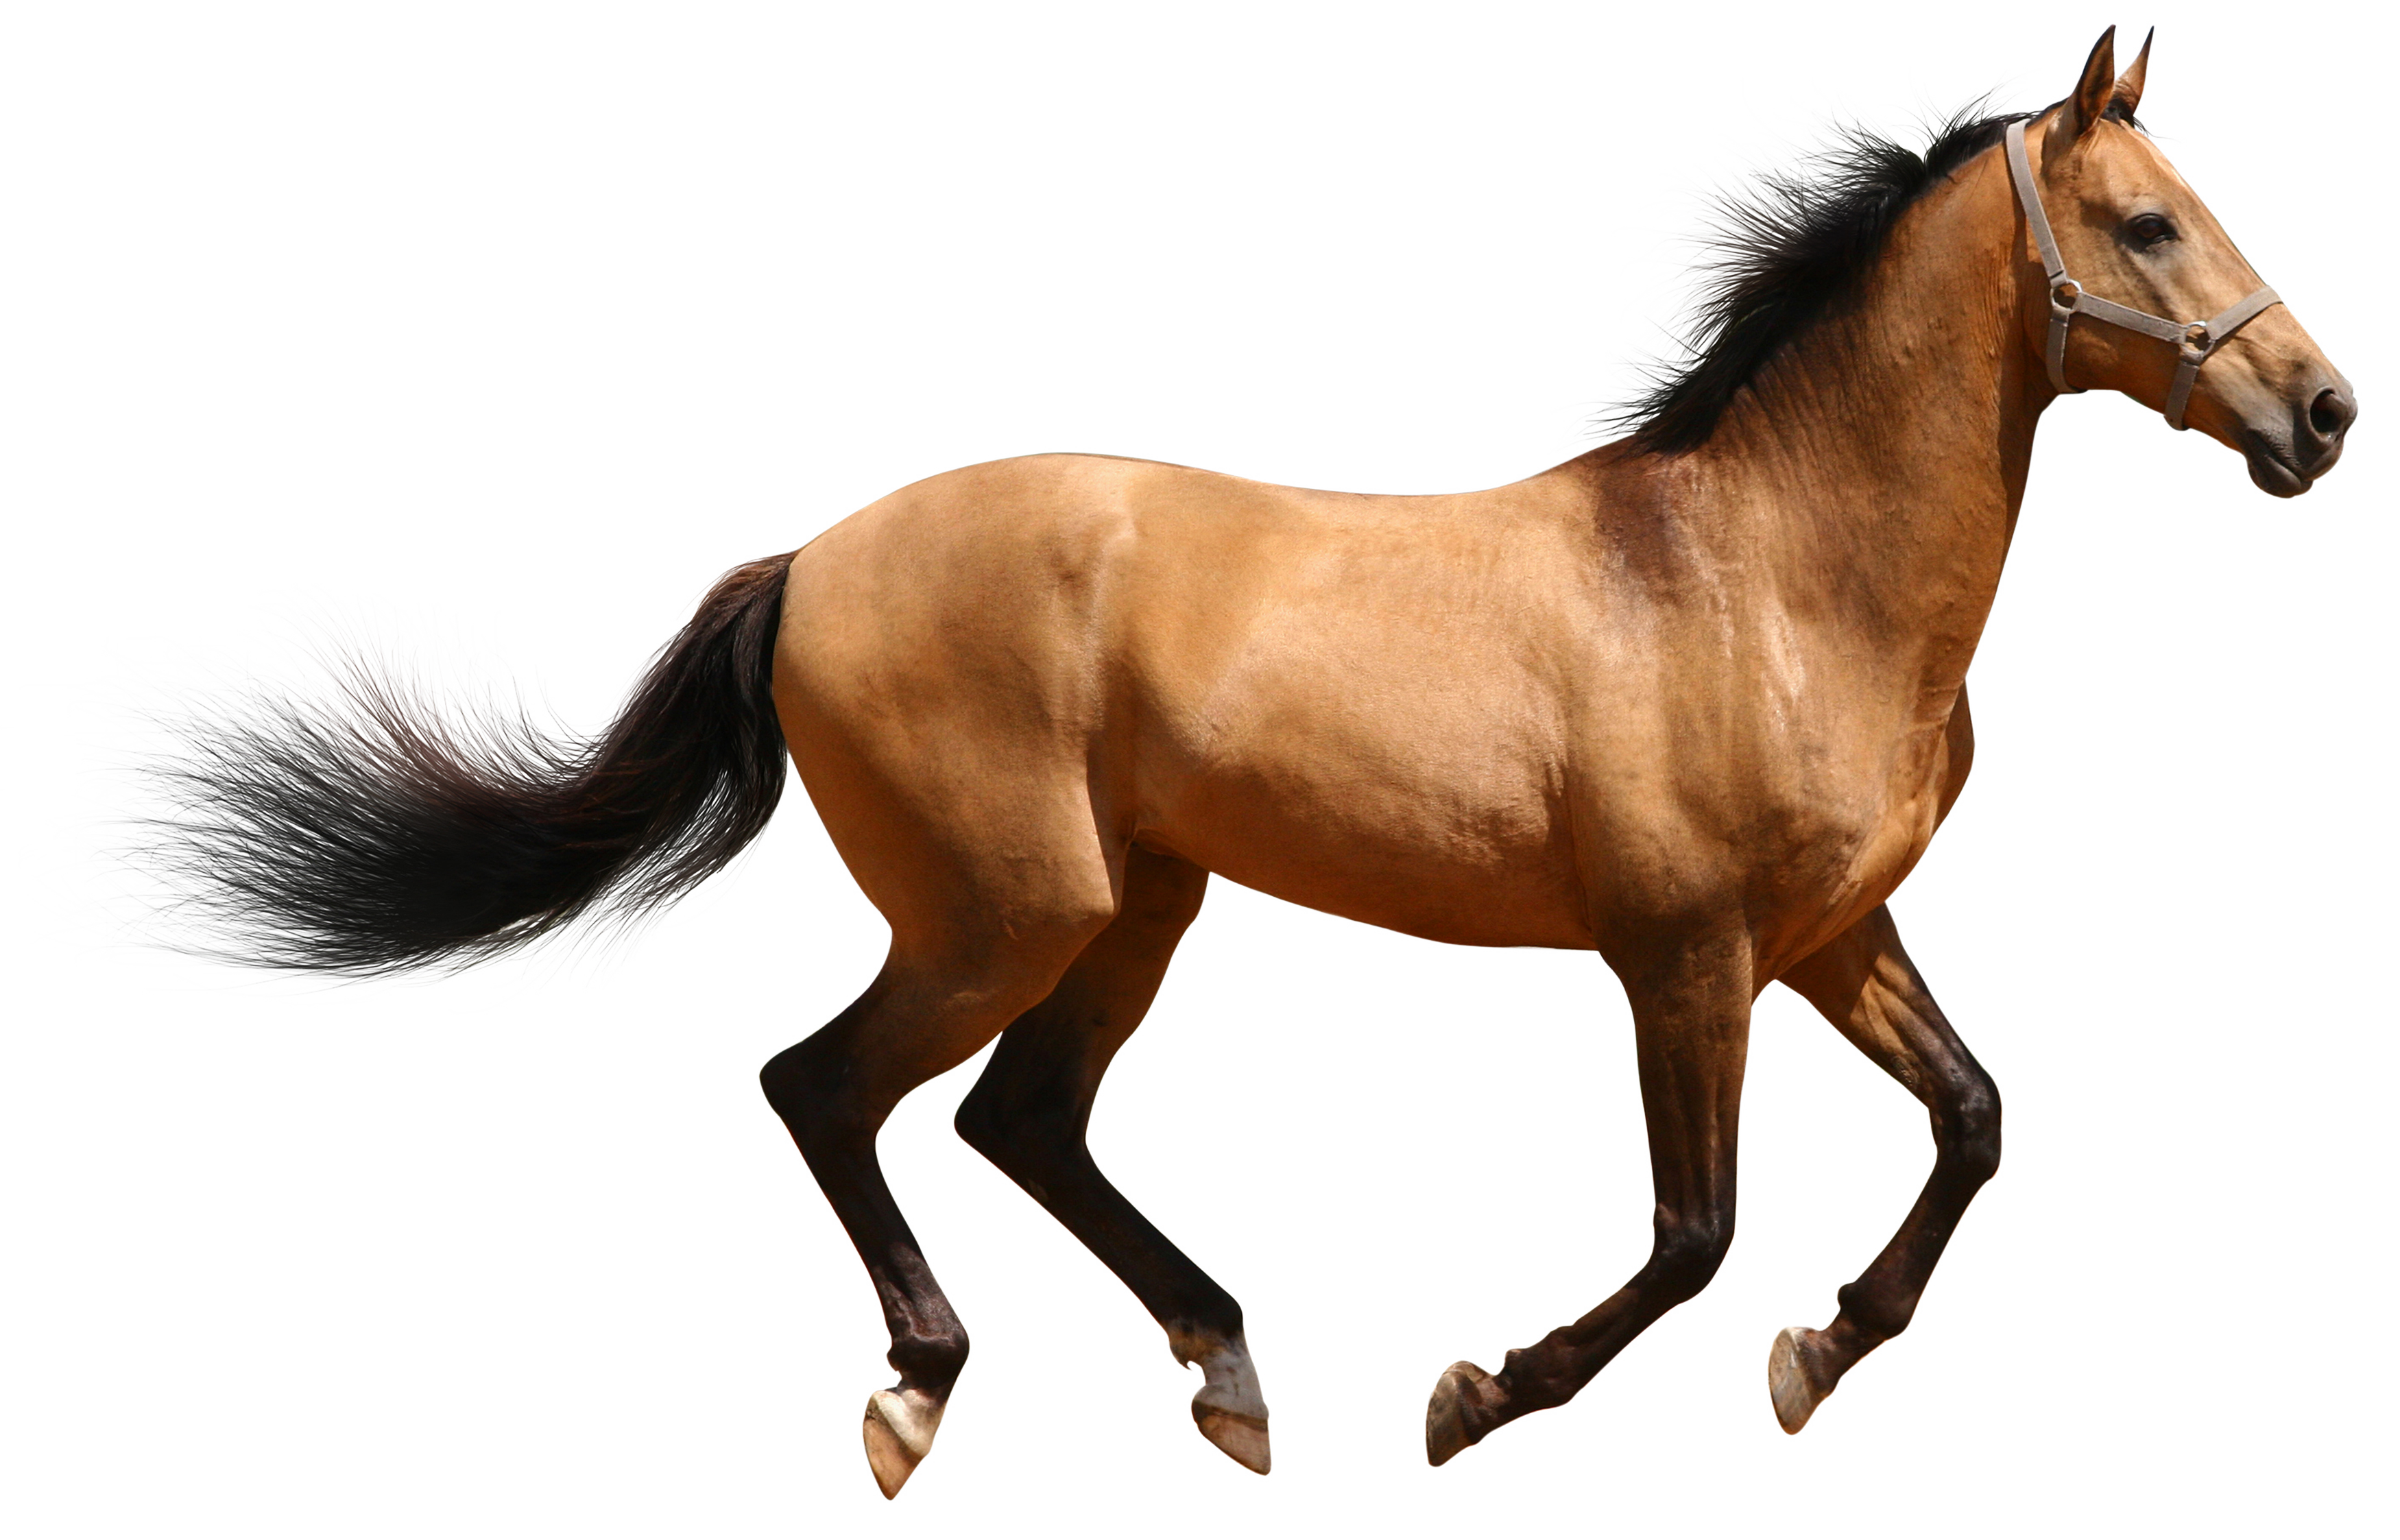 clipart image of a horse - photo #50